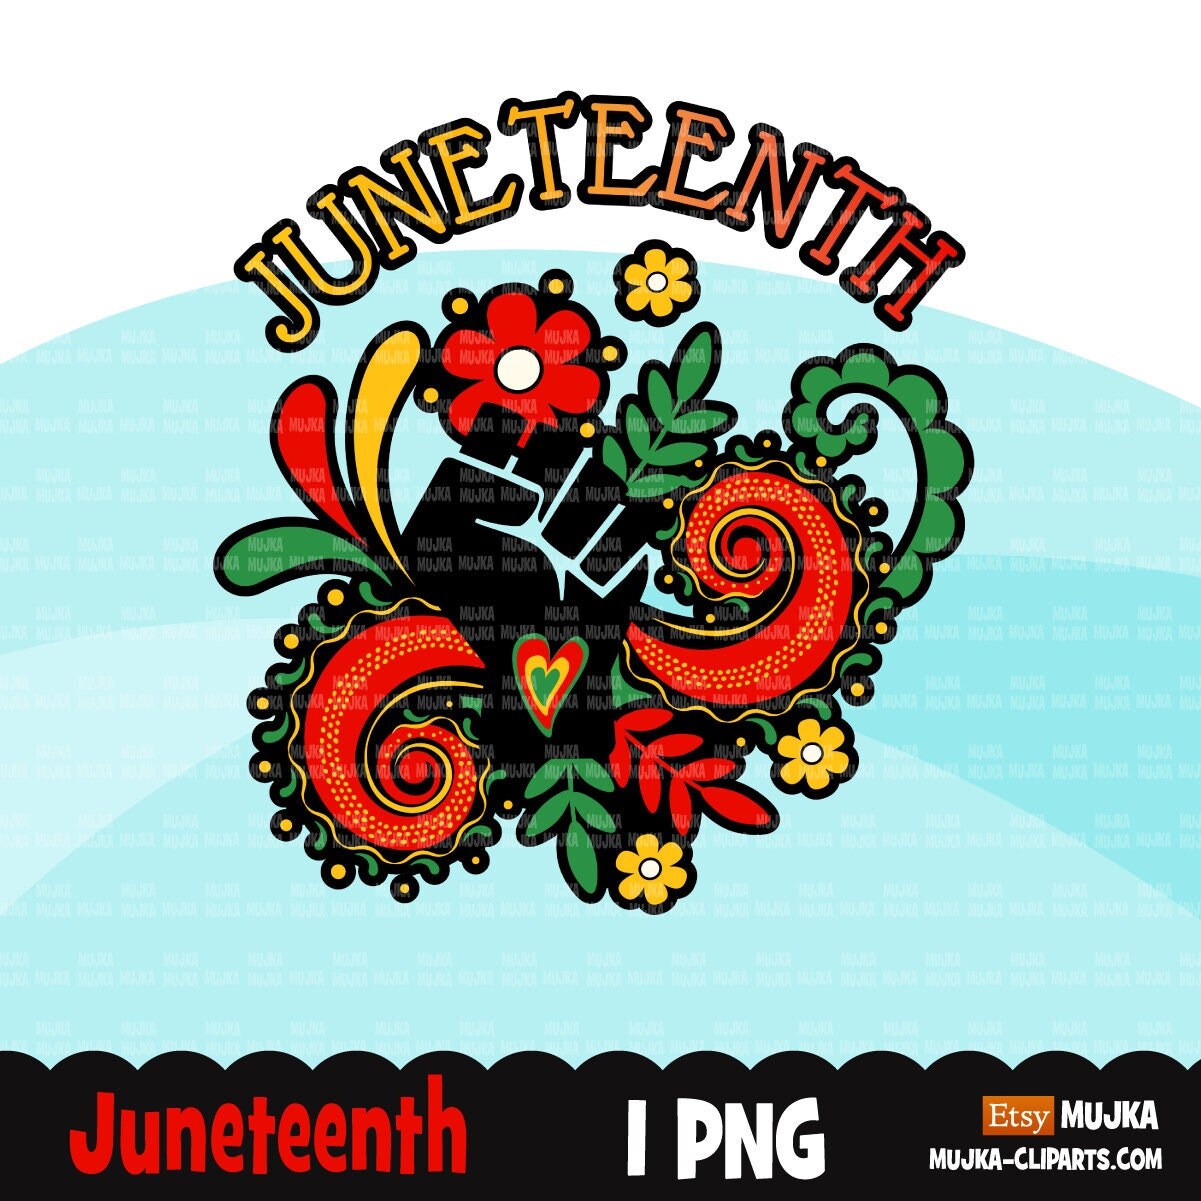 Juneteenth png, black freedom, black history sublimation design, Juneteenth quotes, freedom png